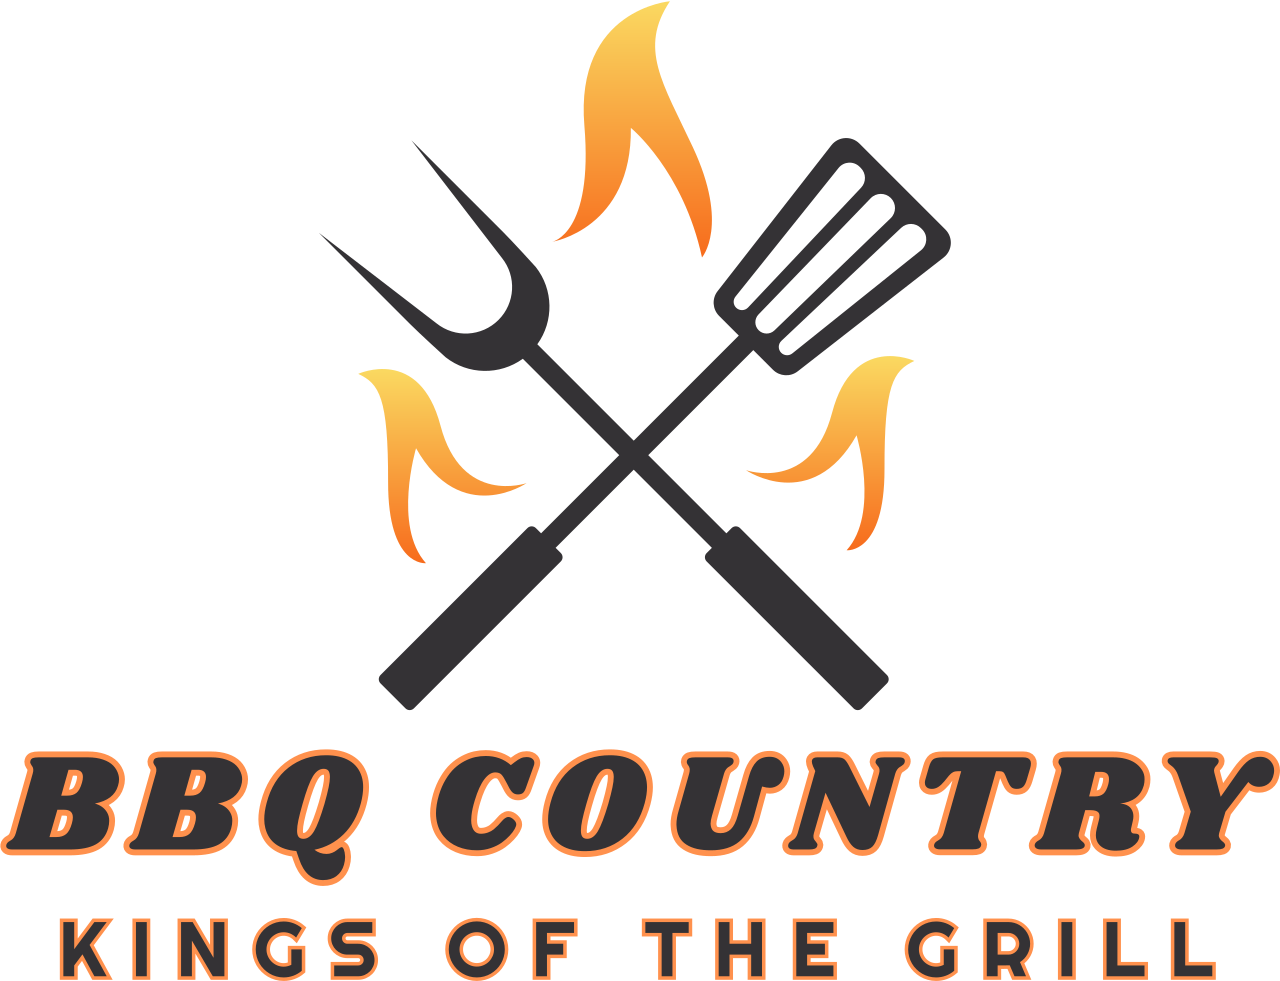 BBQ Country's web page